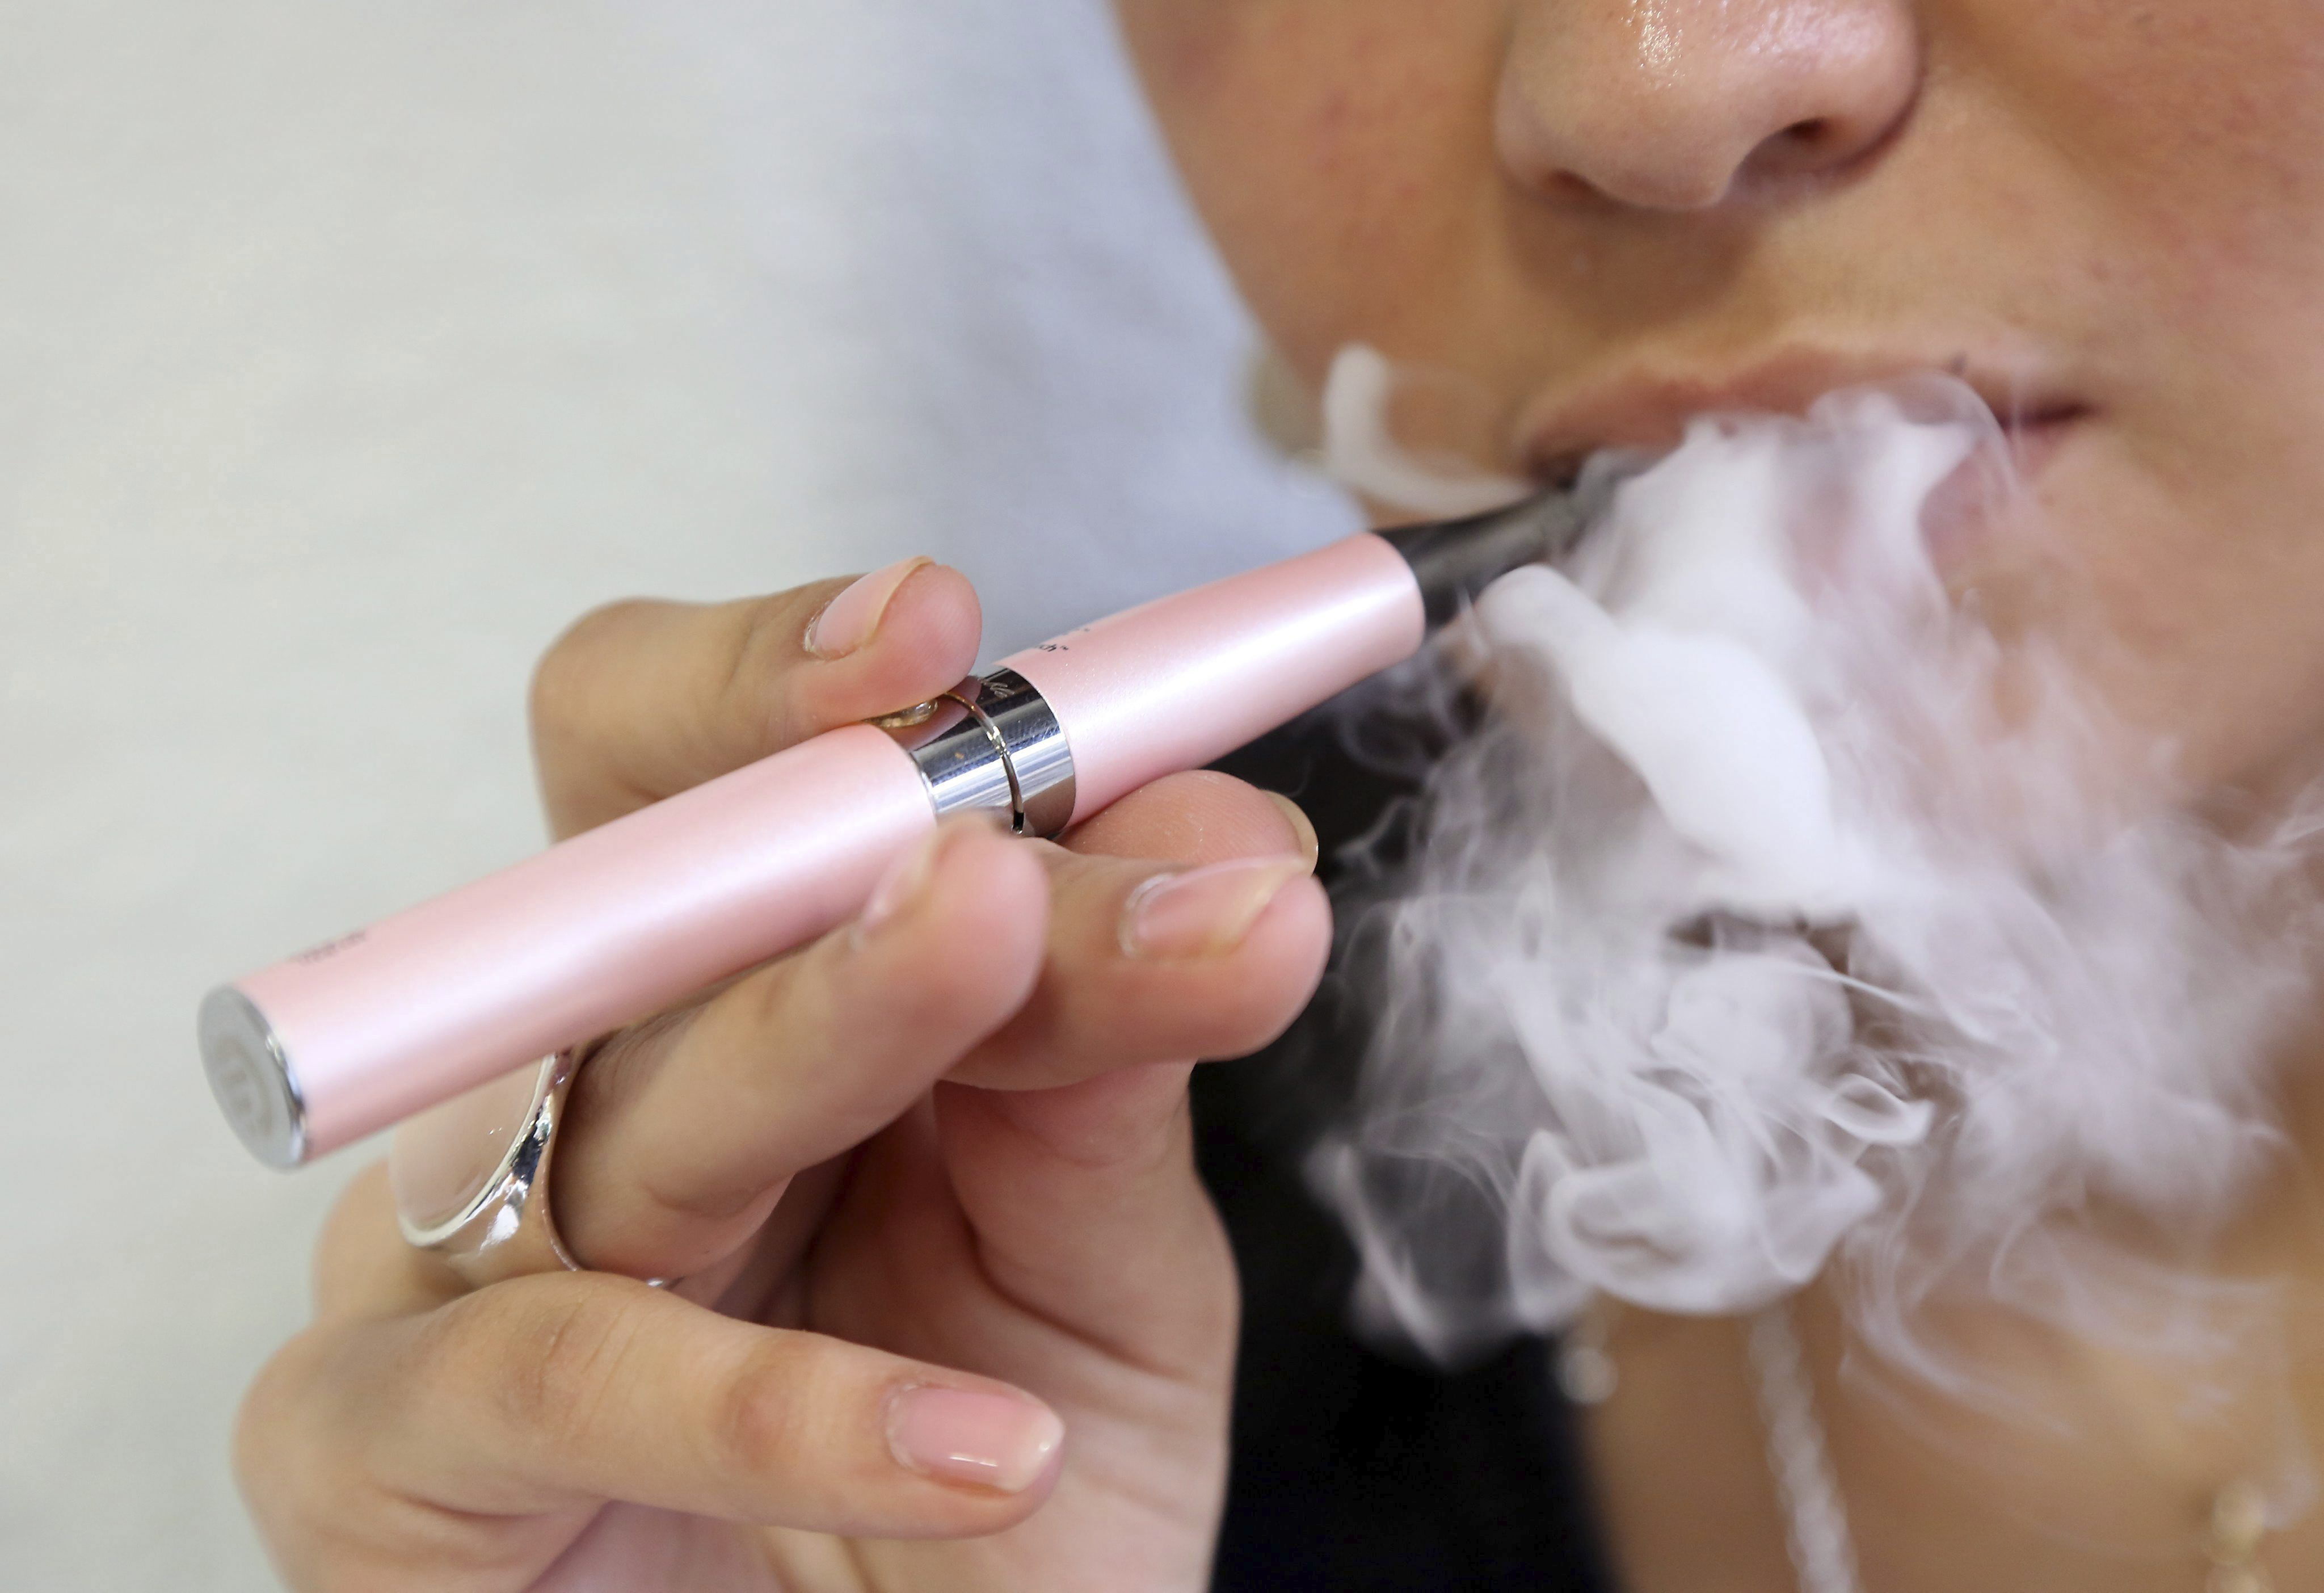 Electronic cigarettes work by heating a liquid that usually contains nicotine into an aerosol that is then inhaled (Efe)